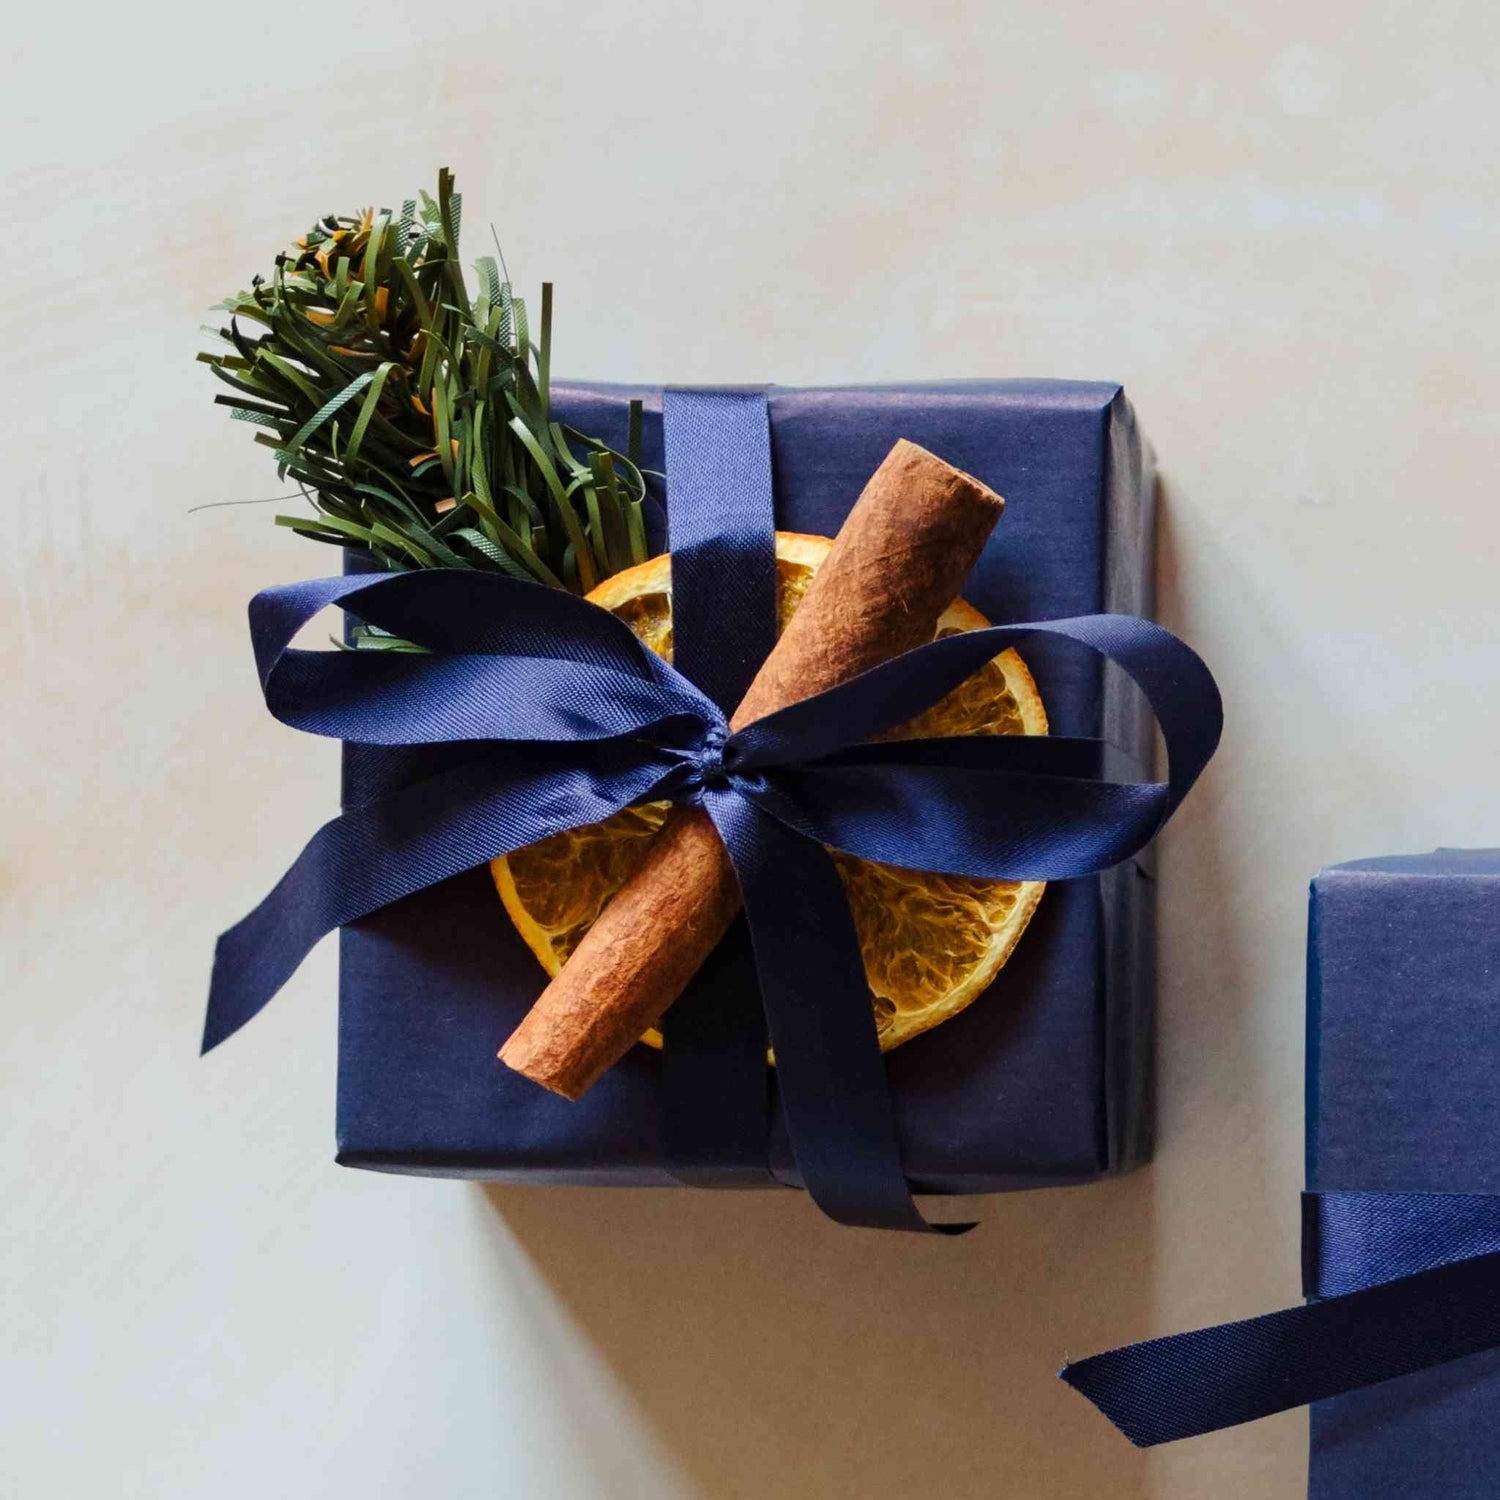 A 200g sweet soy candle from the Home County Co. is shown with luxury Christmas Gift Wrap. The candle is wrapped in luxury navy wrapping paper secured with navy ribbon and Christmas embellishments.